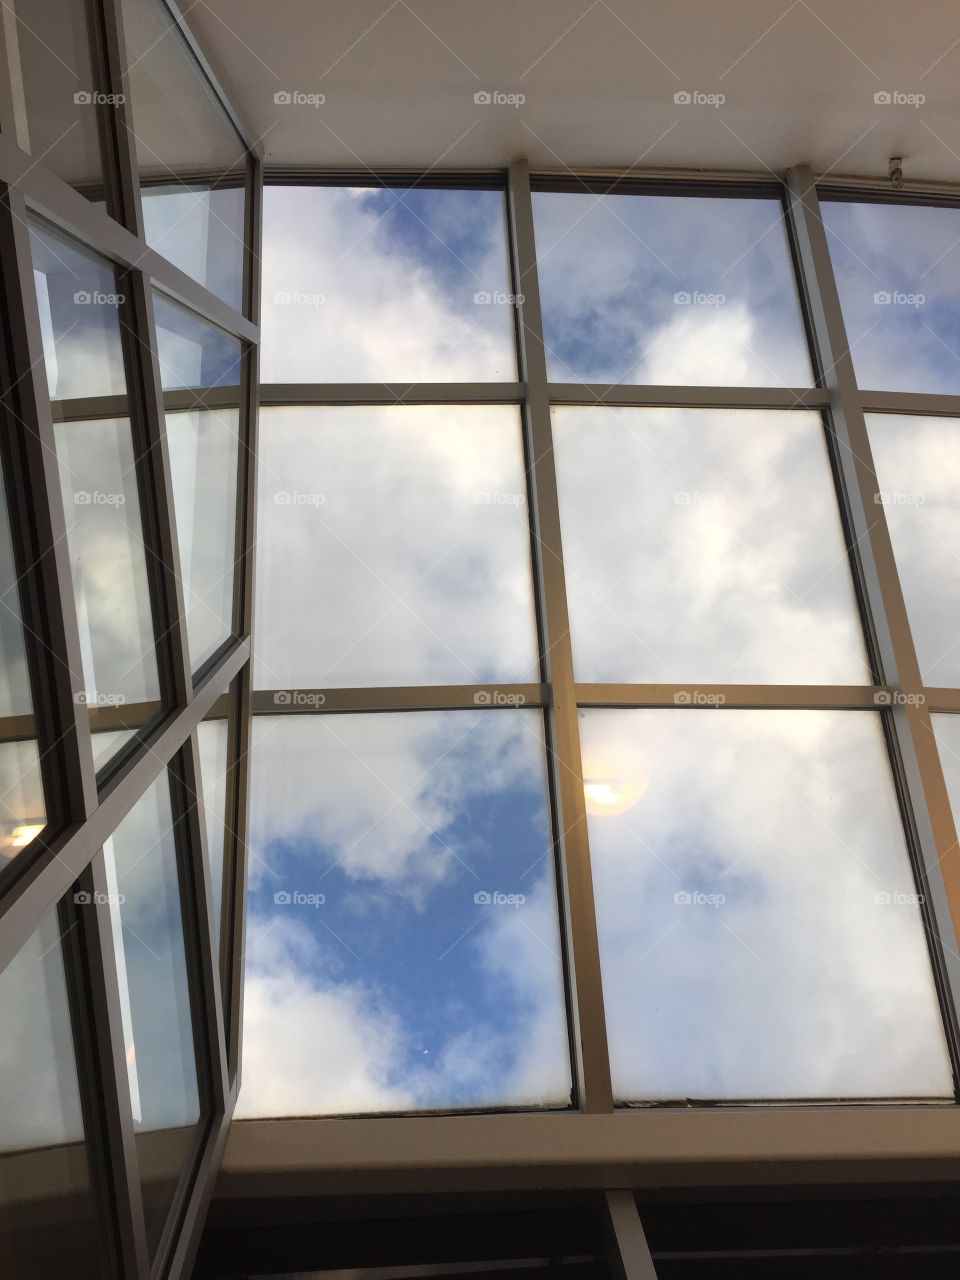 Looking up through the skylight